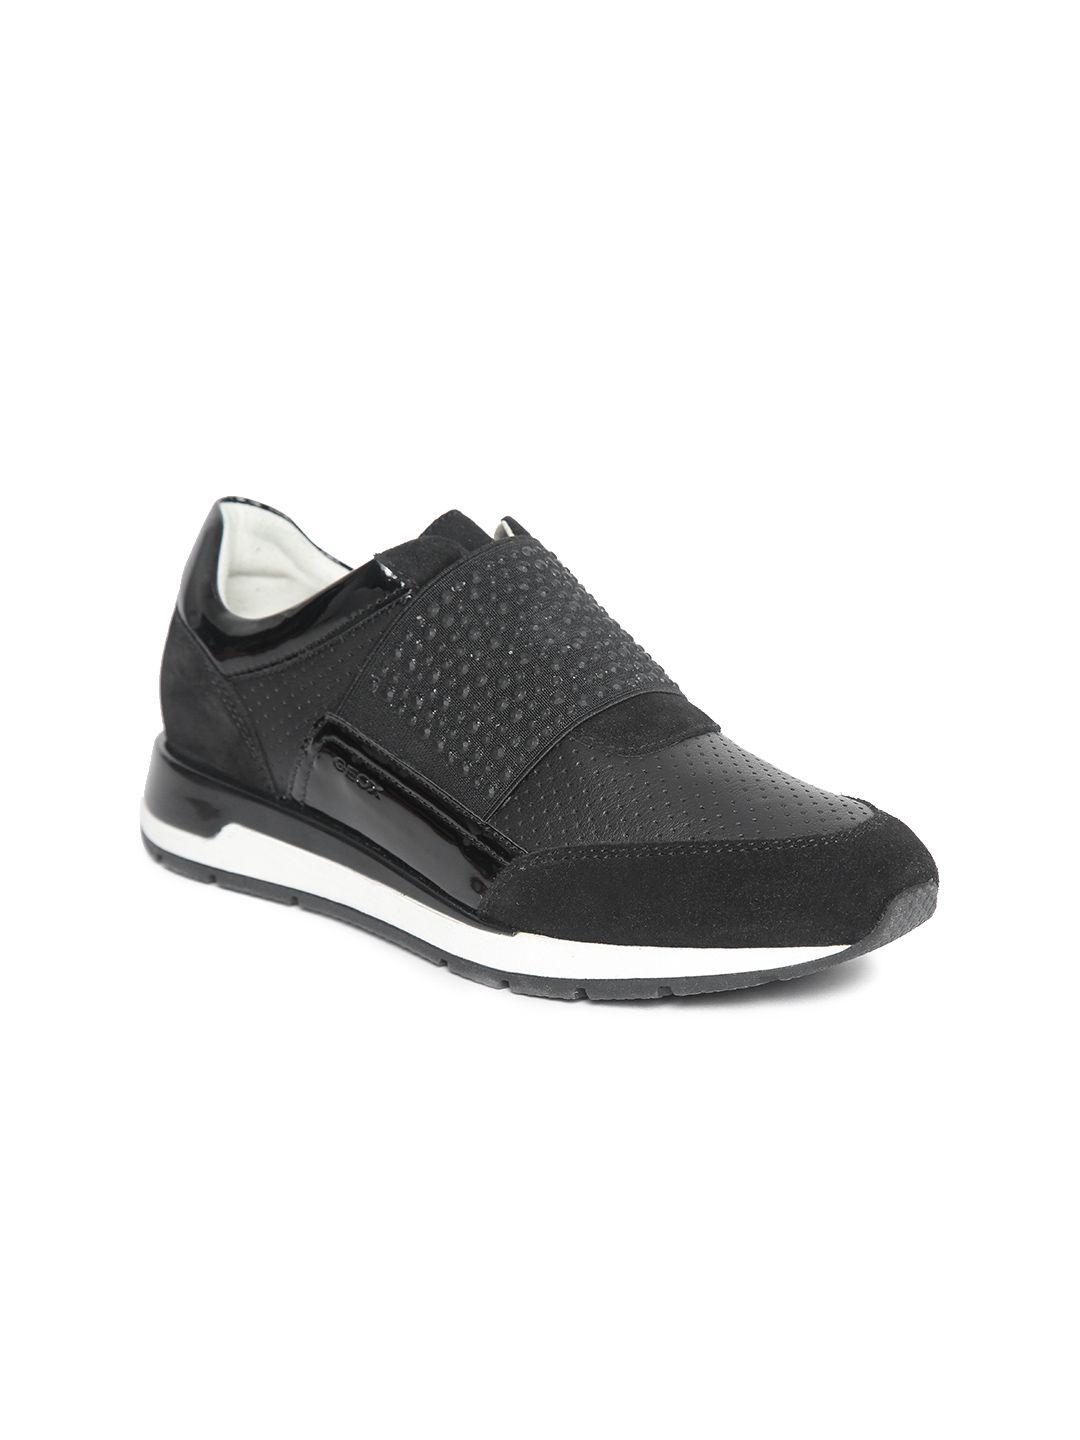 geox women black leather perforated slip-on sneakers